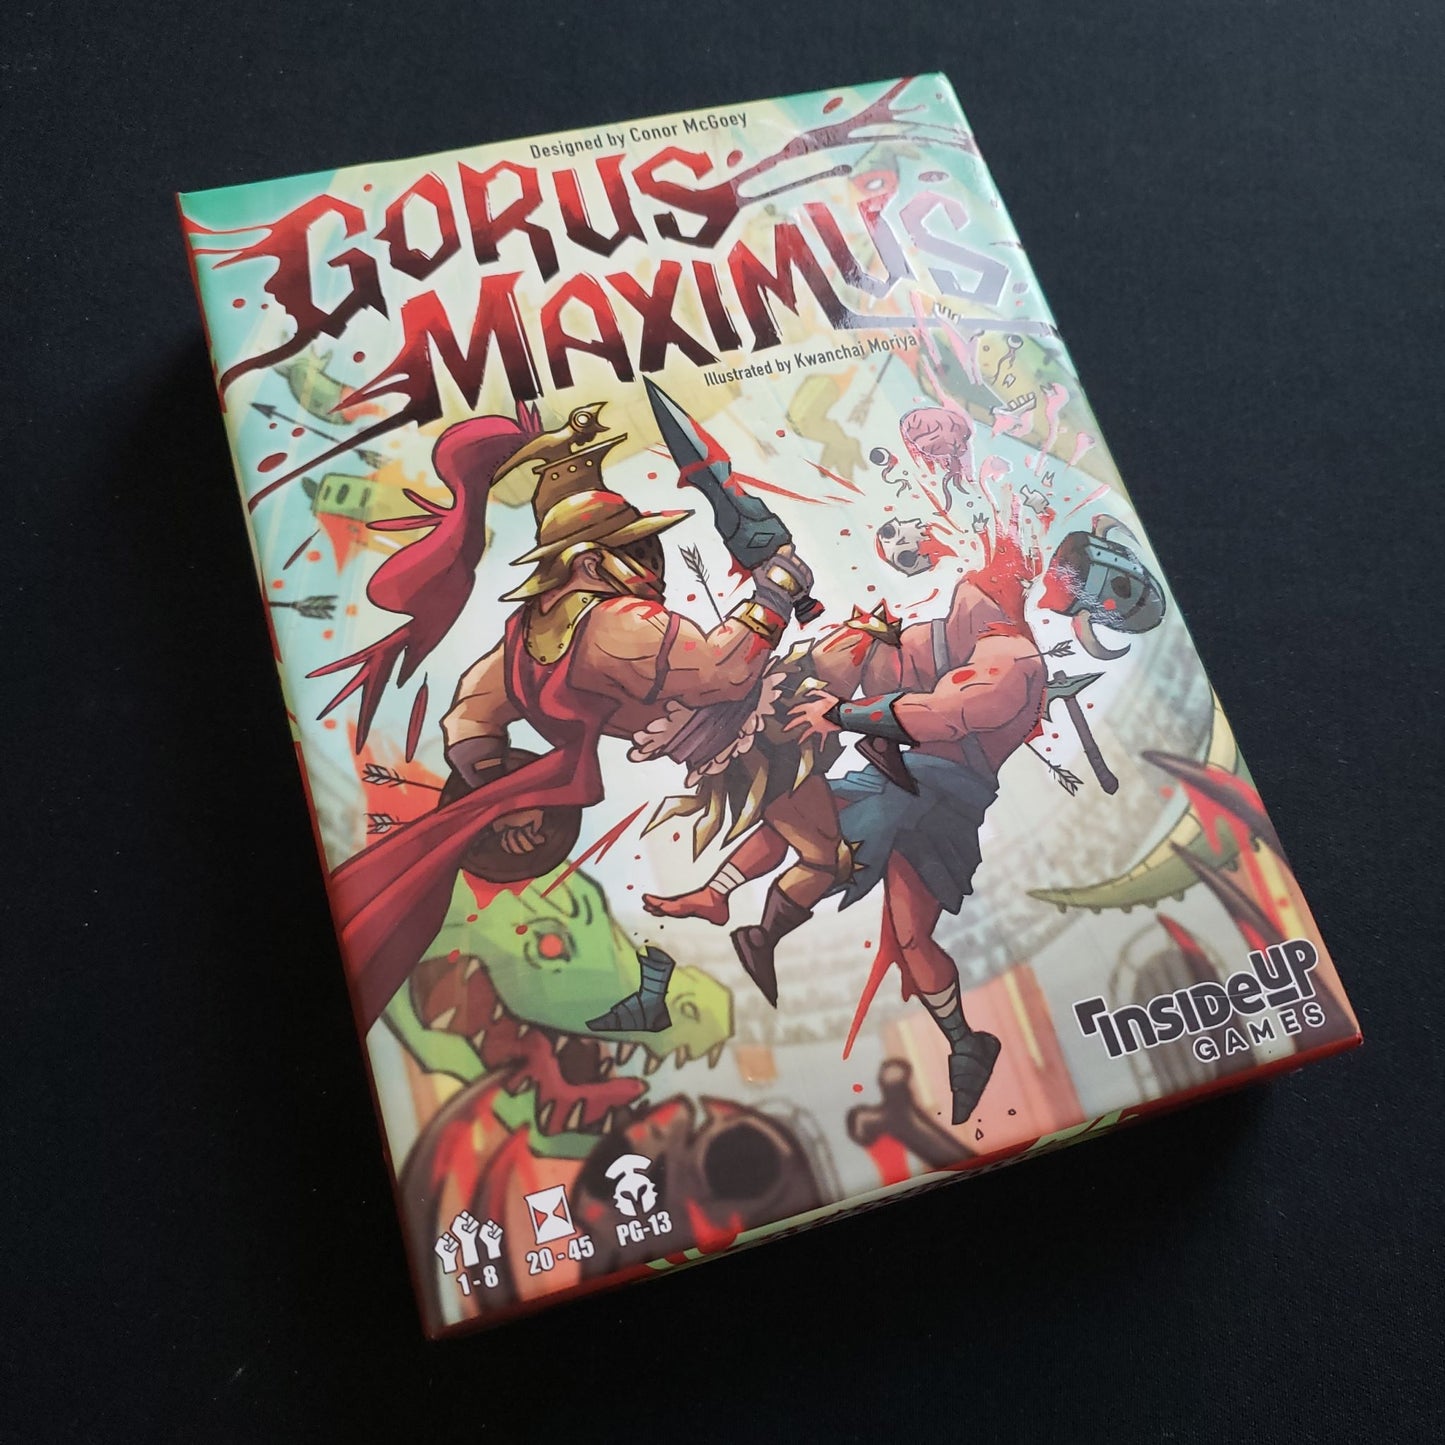 Gorus Maximus card game - front cover of box